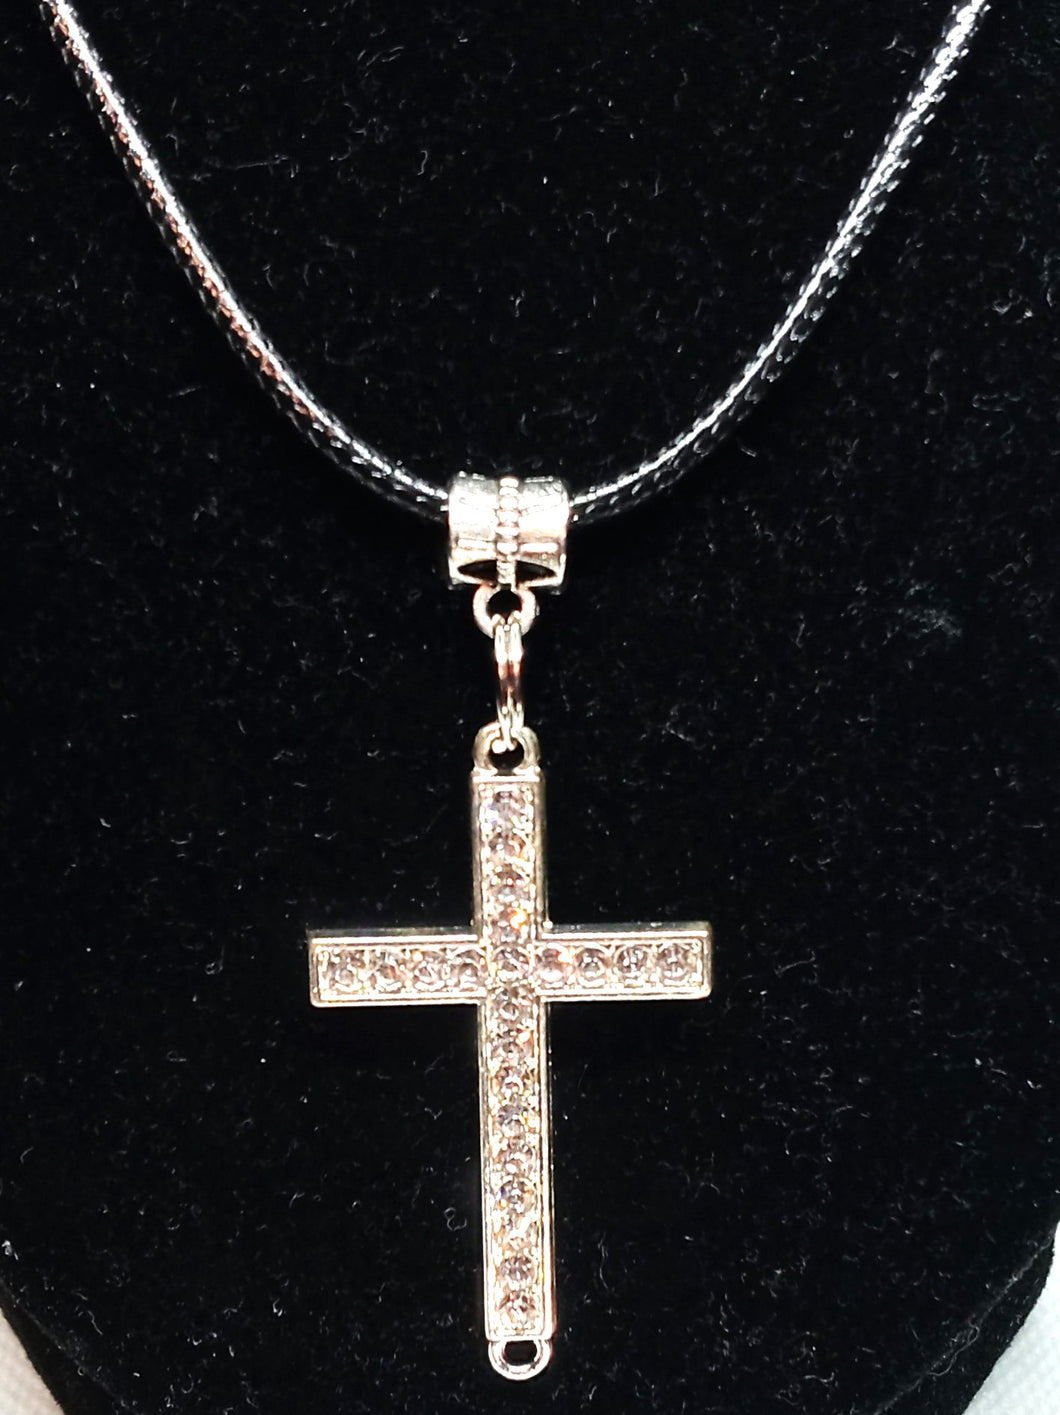 Handcrafted Silver or Gold Crystal Cross Necklace